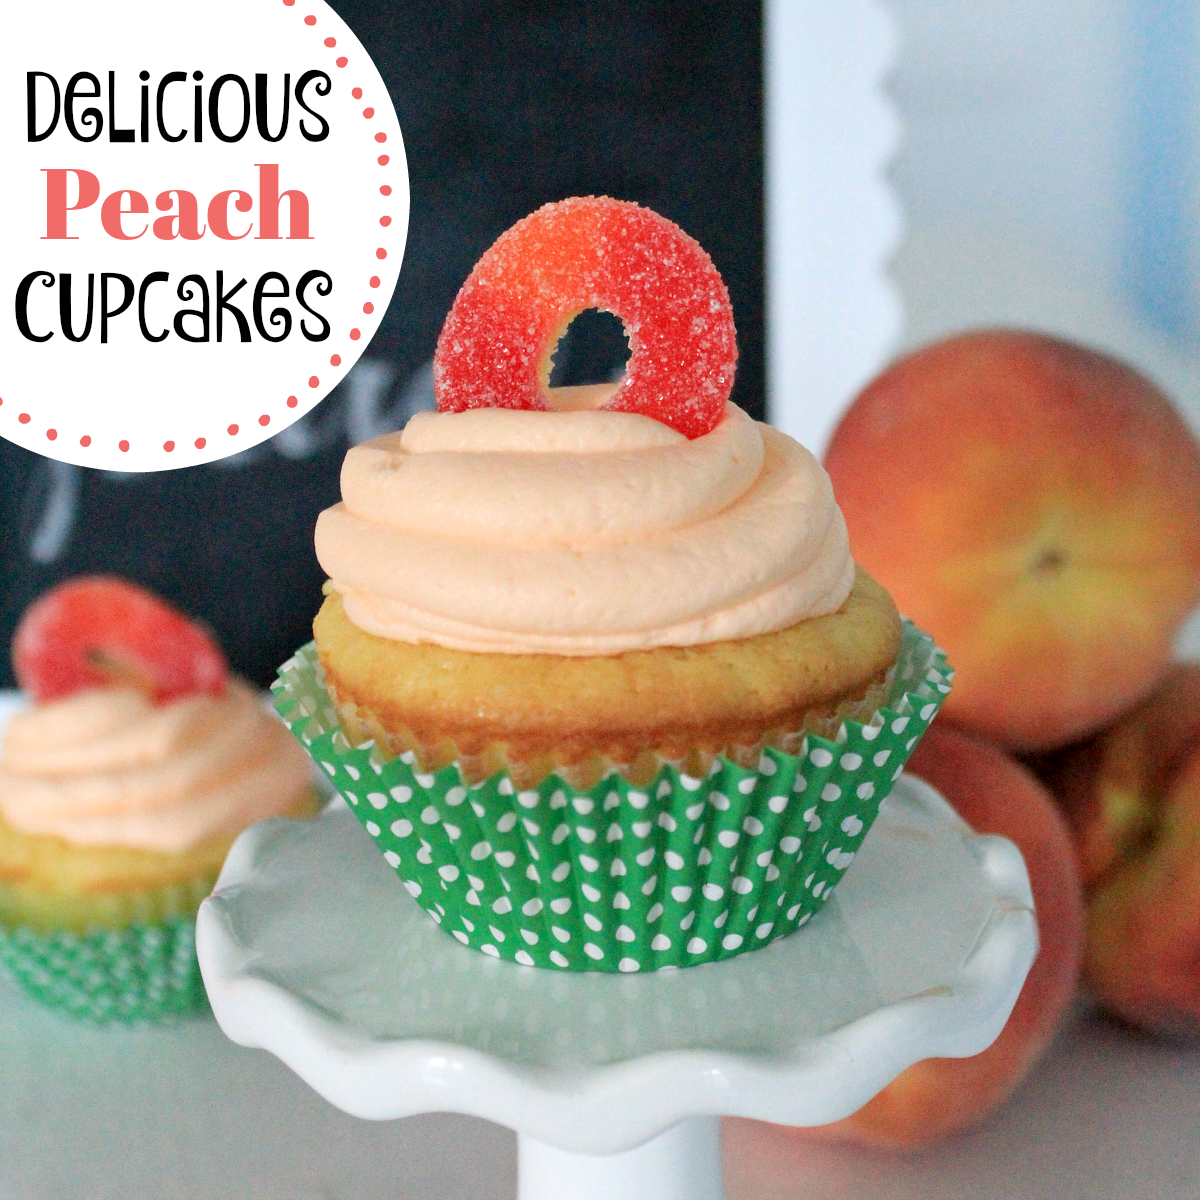 Delicious peach cupcakes-This peach cupcake recipe is going to have you drooling-it's so good! #dessert #cupcakes #peach